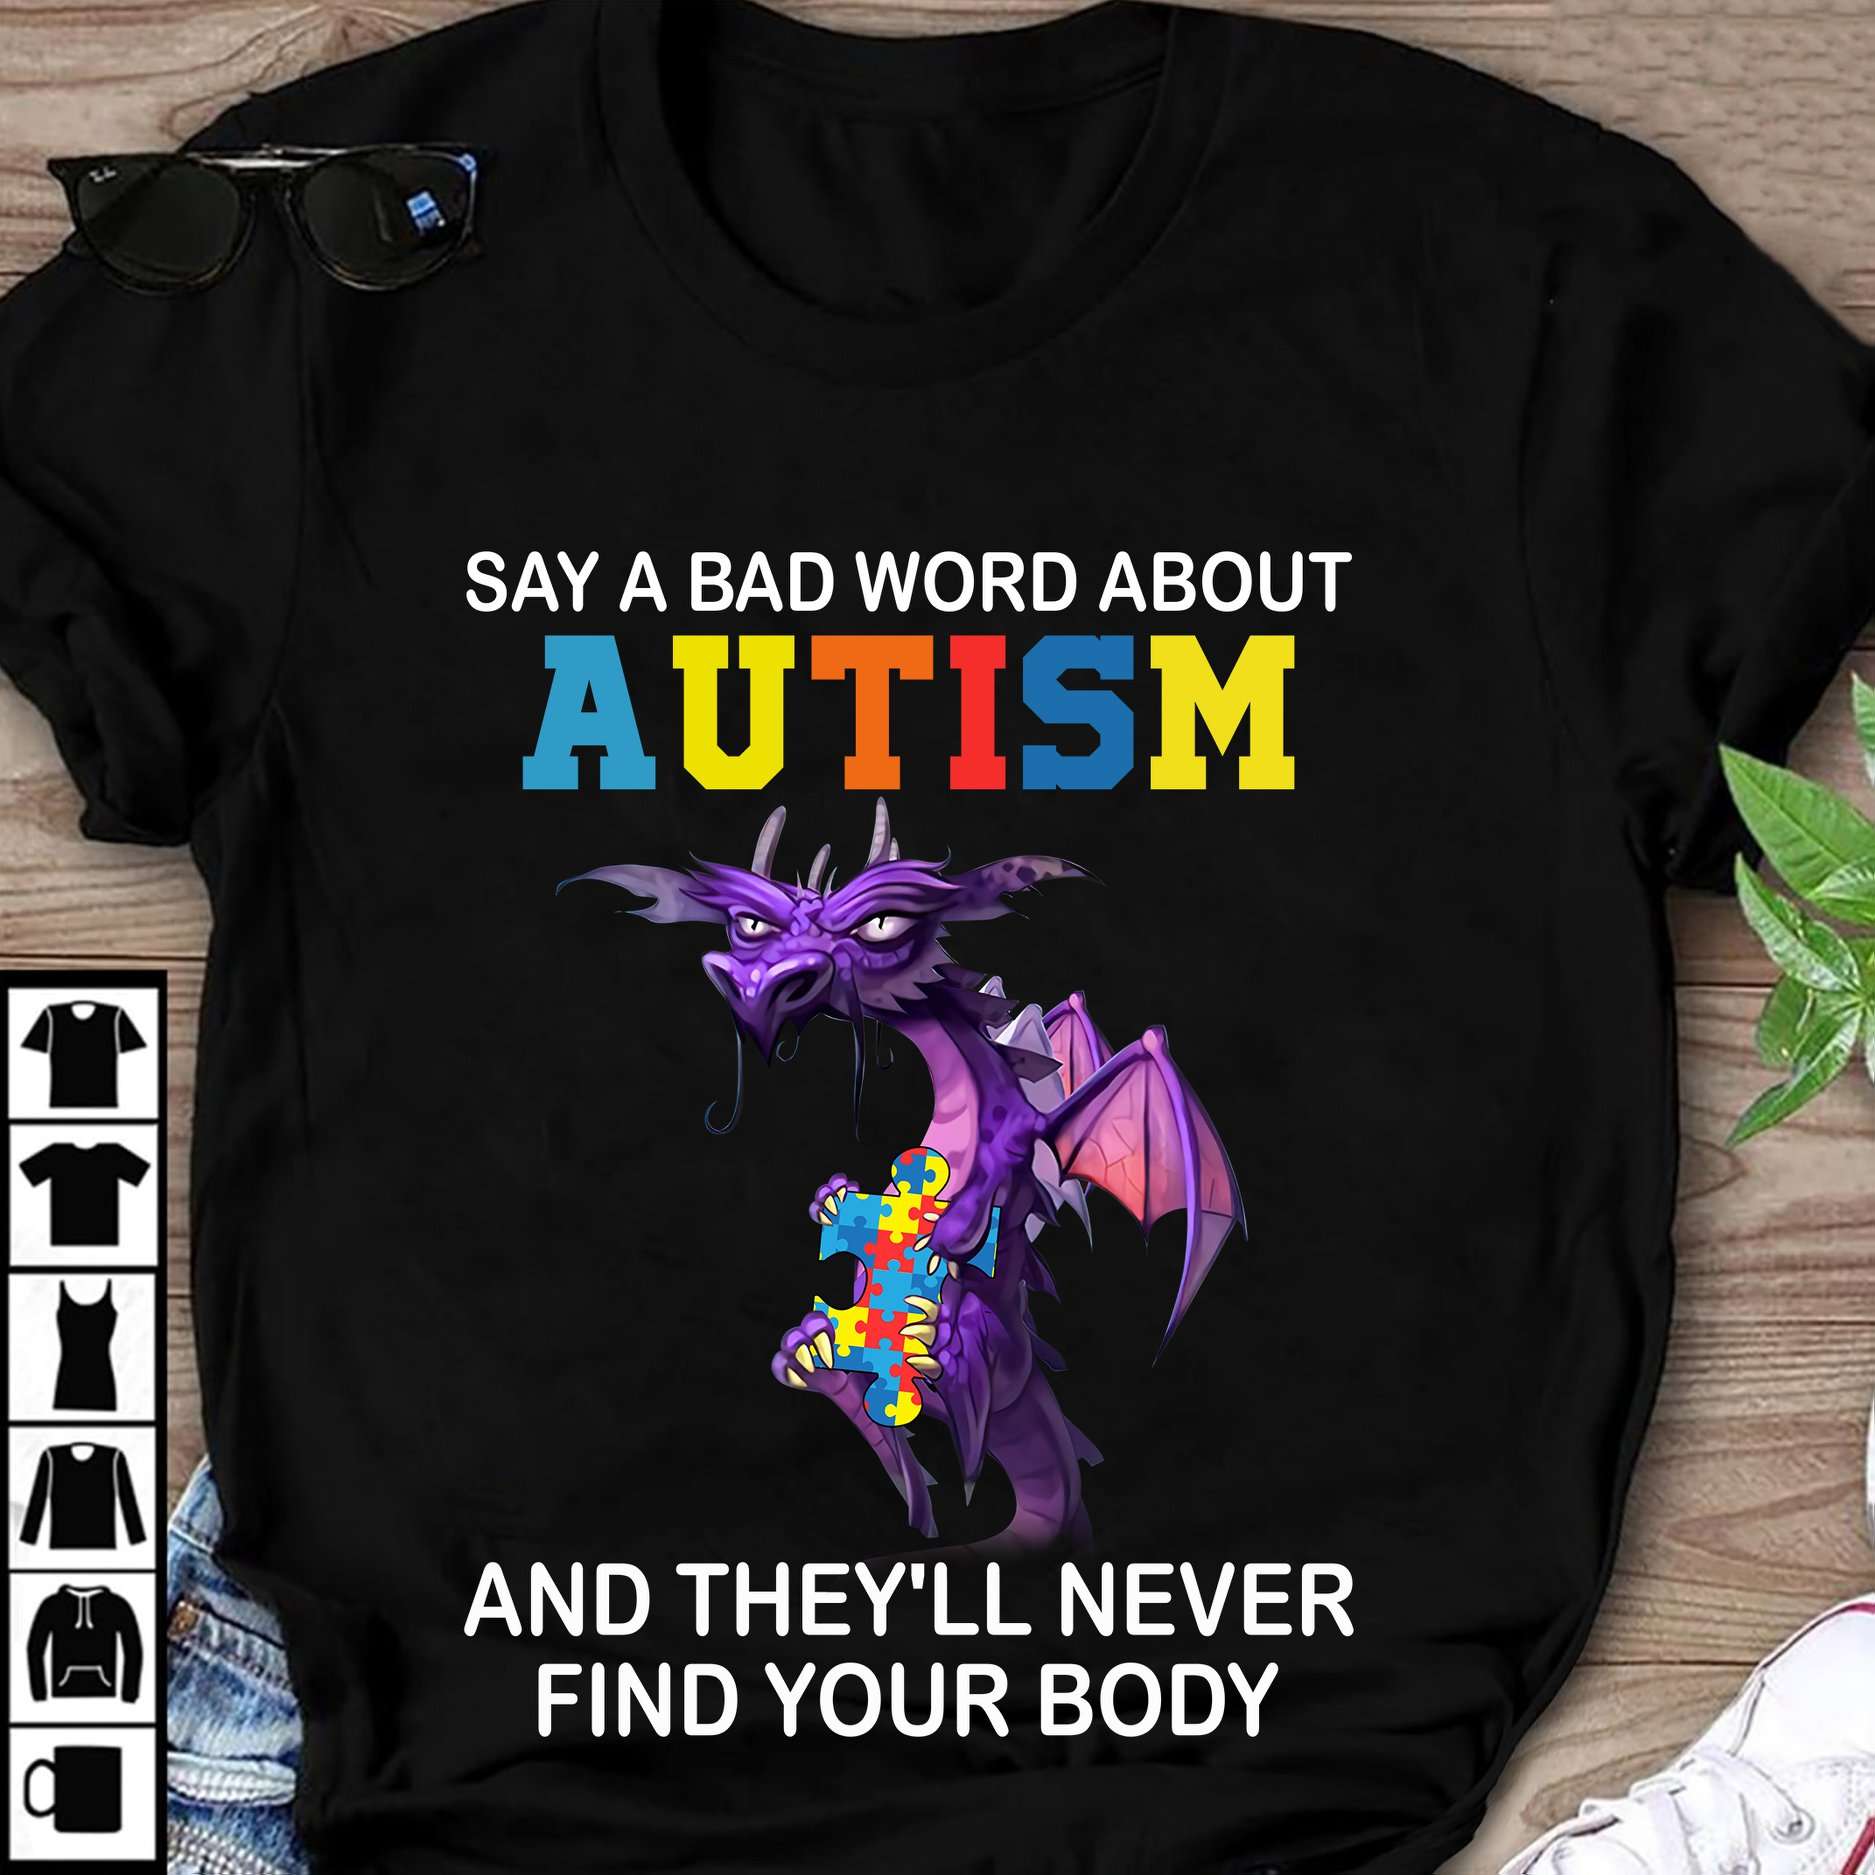 Say a bad word about autism and they'll never find your body - Dragon and autism, autism awareness